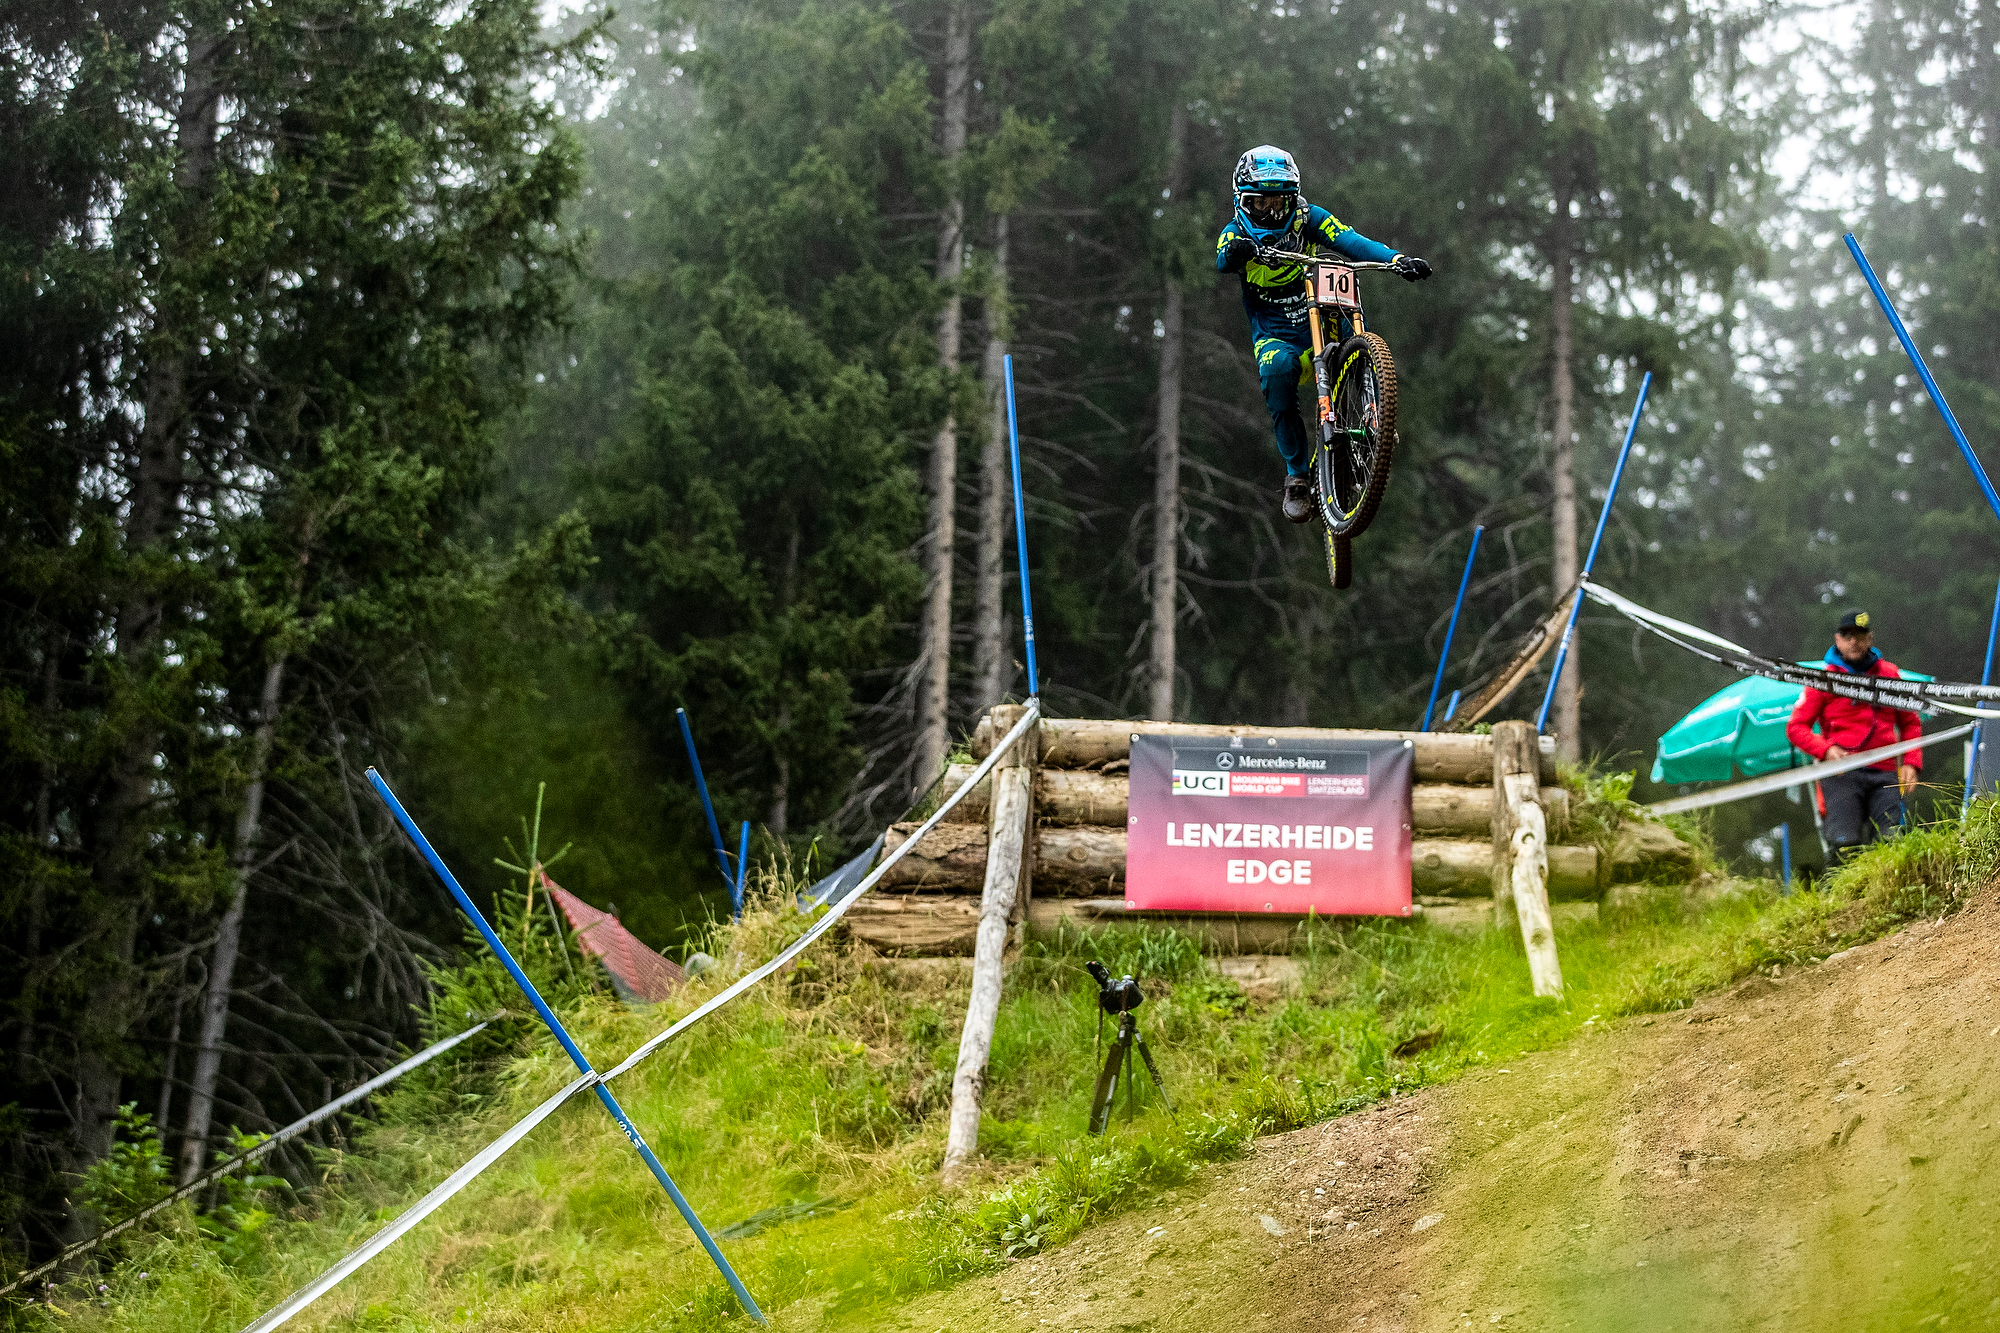 Emilie Siegenthaler launches off a jump on the DH course.